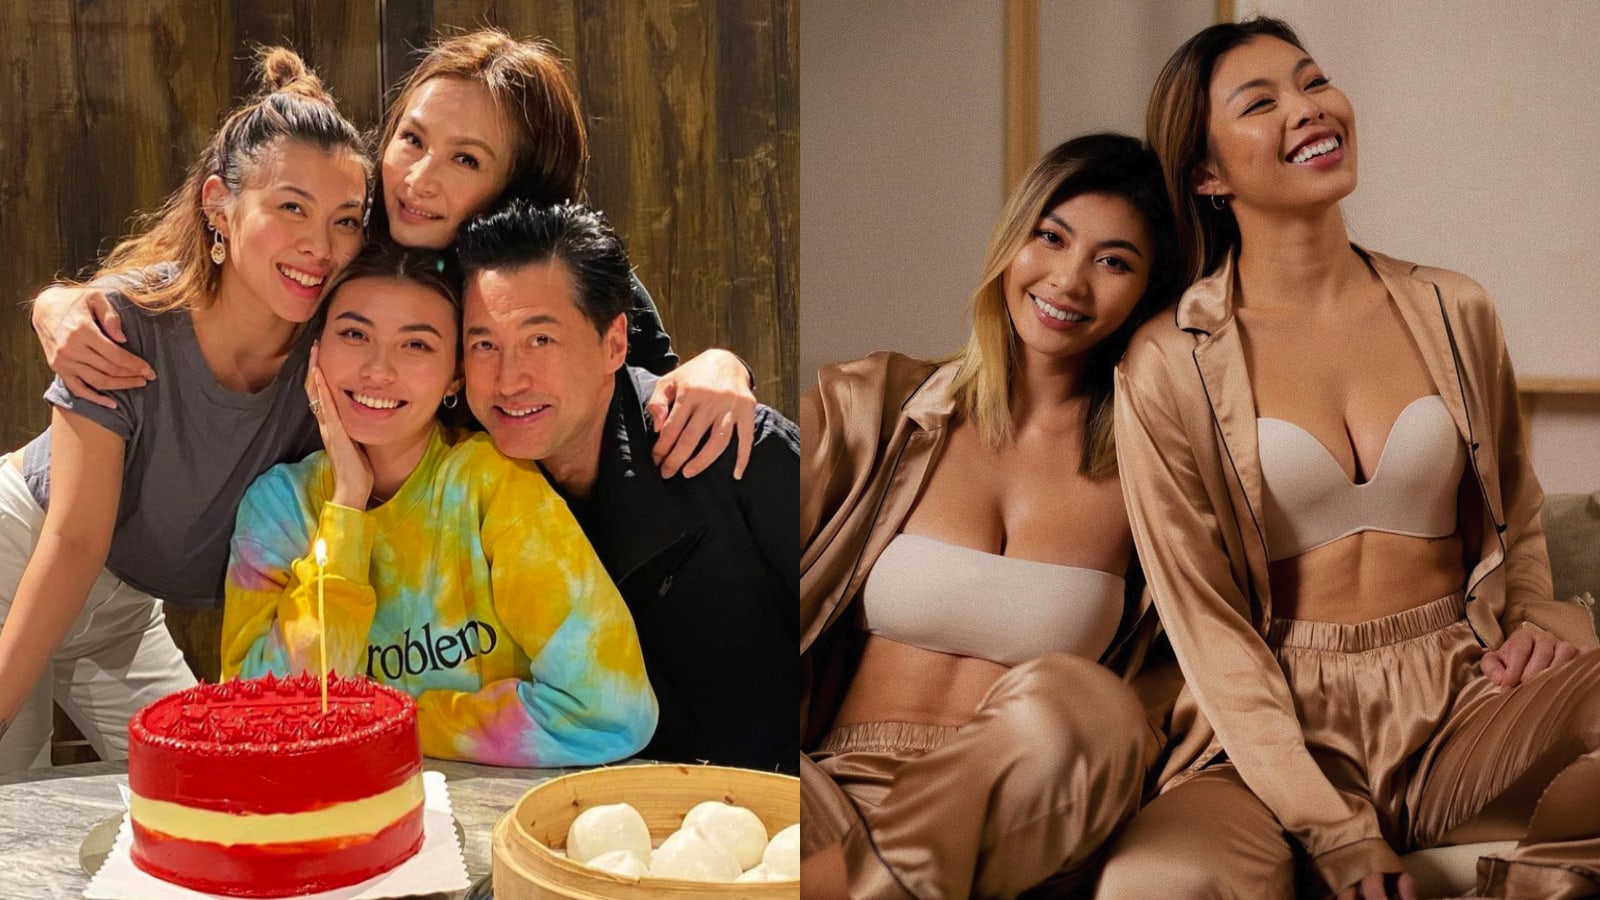 Hongkong Actor Michael Wong’s Daughters Share Sizzling Photos From Lingerie Shoot